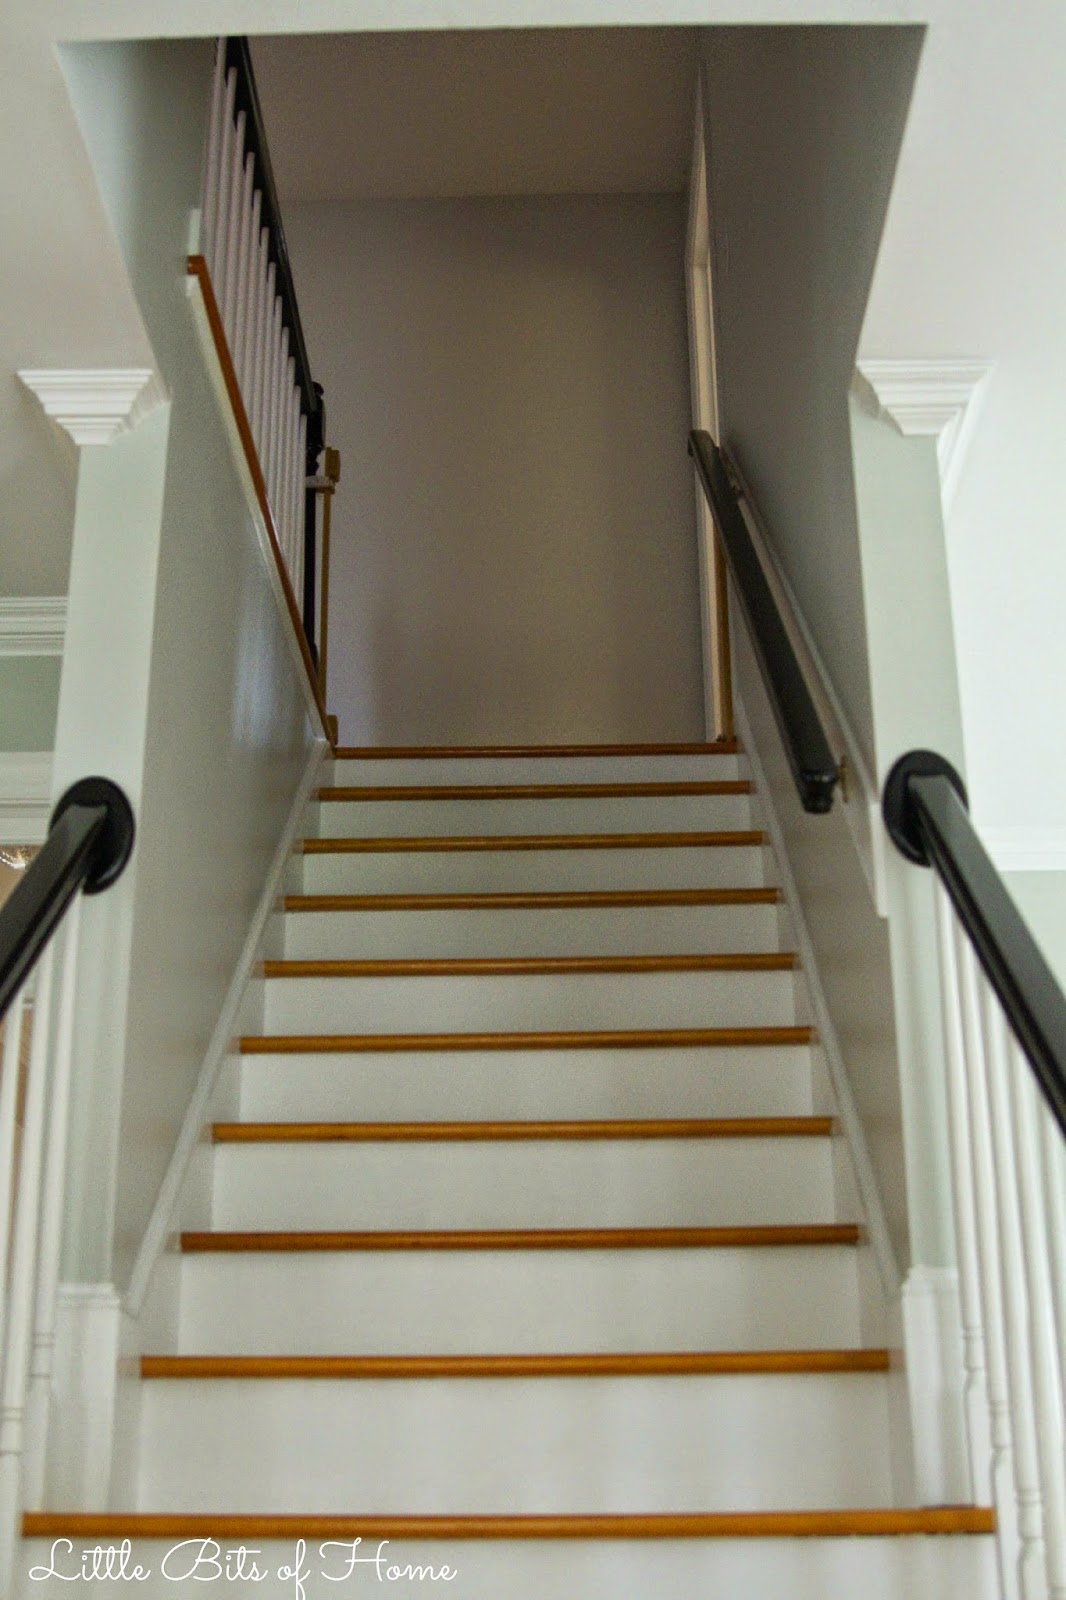 How To Paint A Stairwell Without Hiring Help